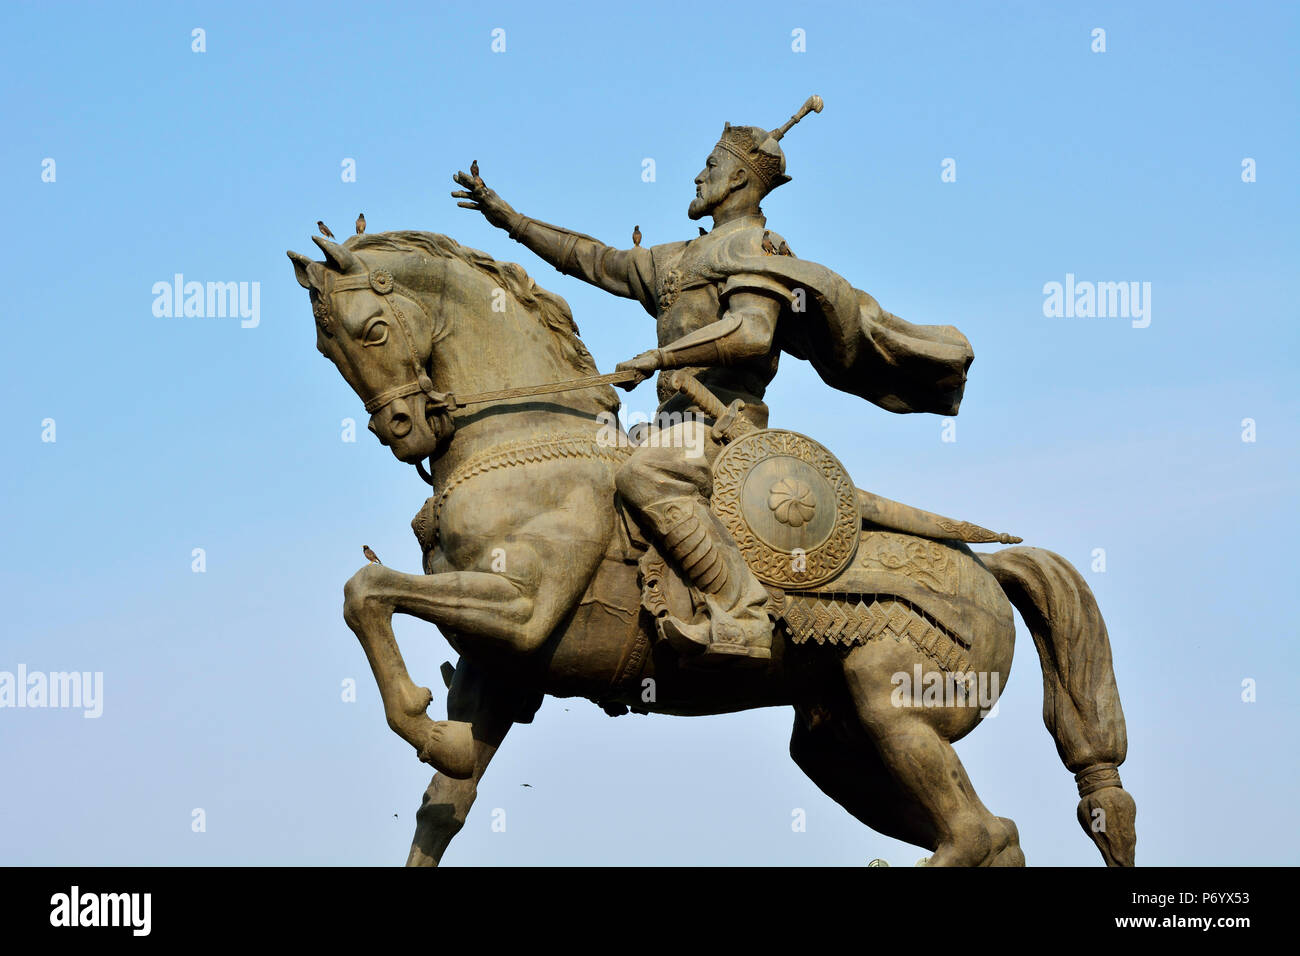 Statue of Amir Timur (Tamerlane, 1336-1405). He was the founder of the Timurid Empire in Central Asia and became the first ruler in the Timurid dynasty. Tashkent, Uzbekistan Stock Photo